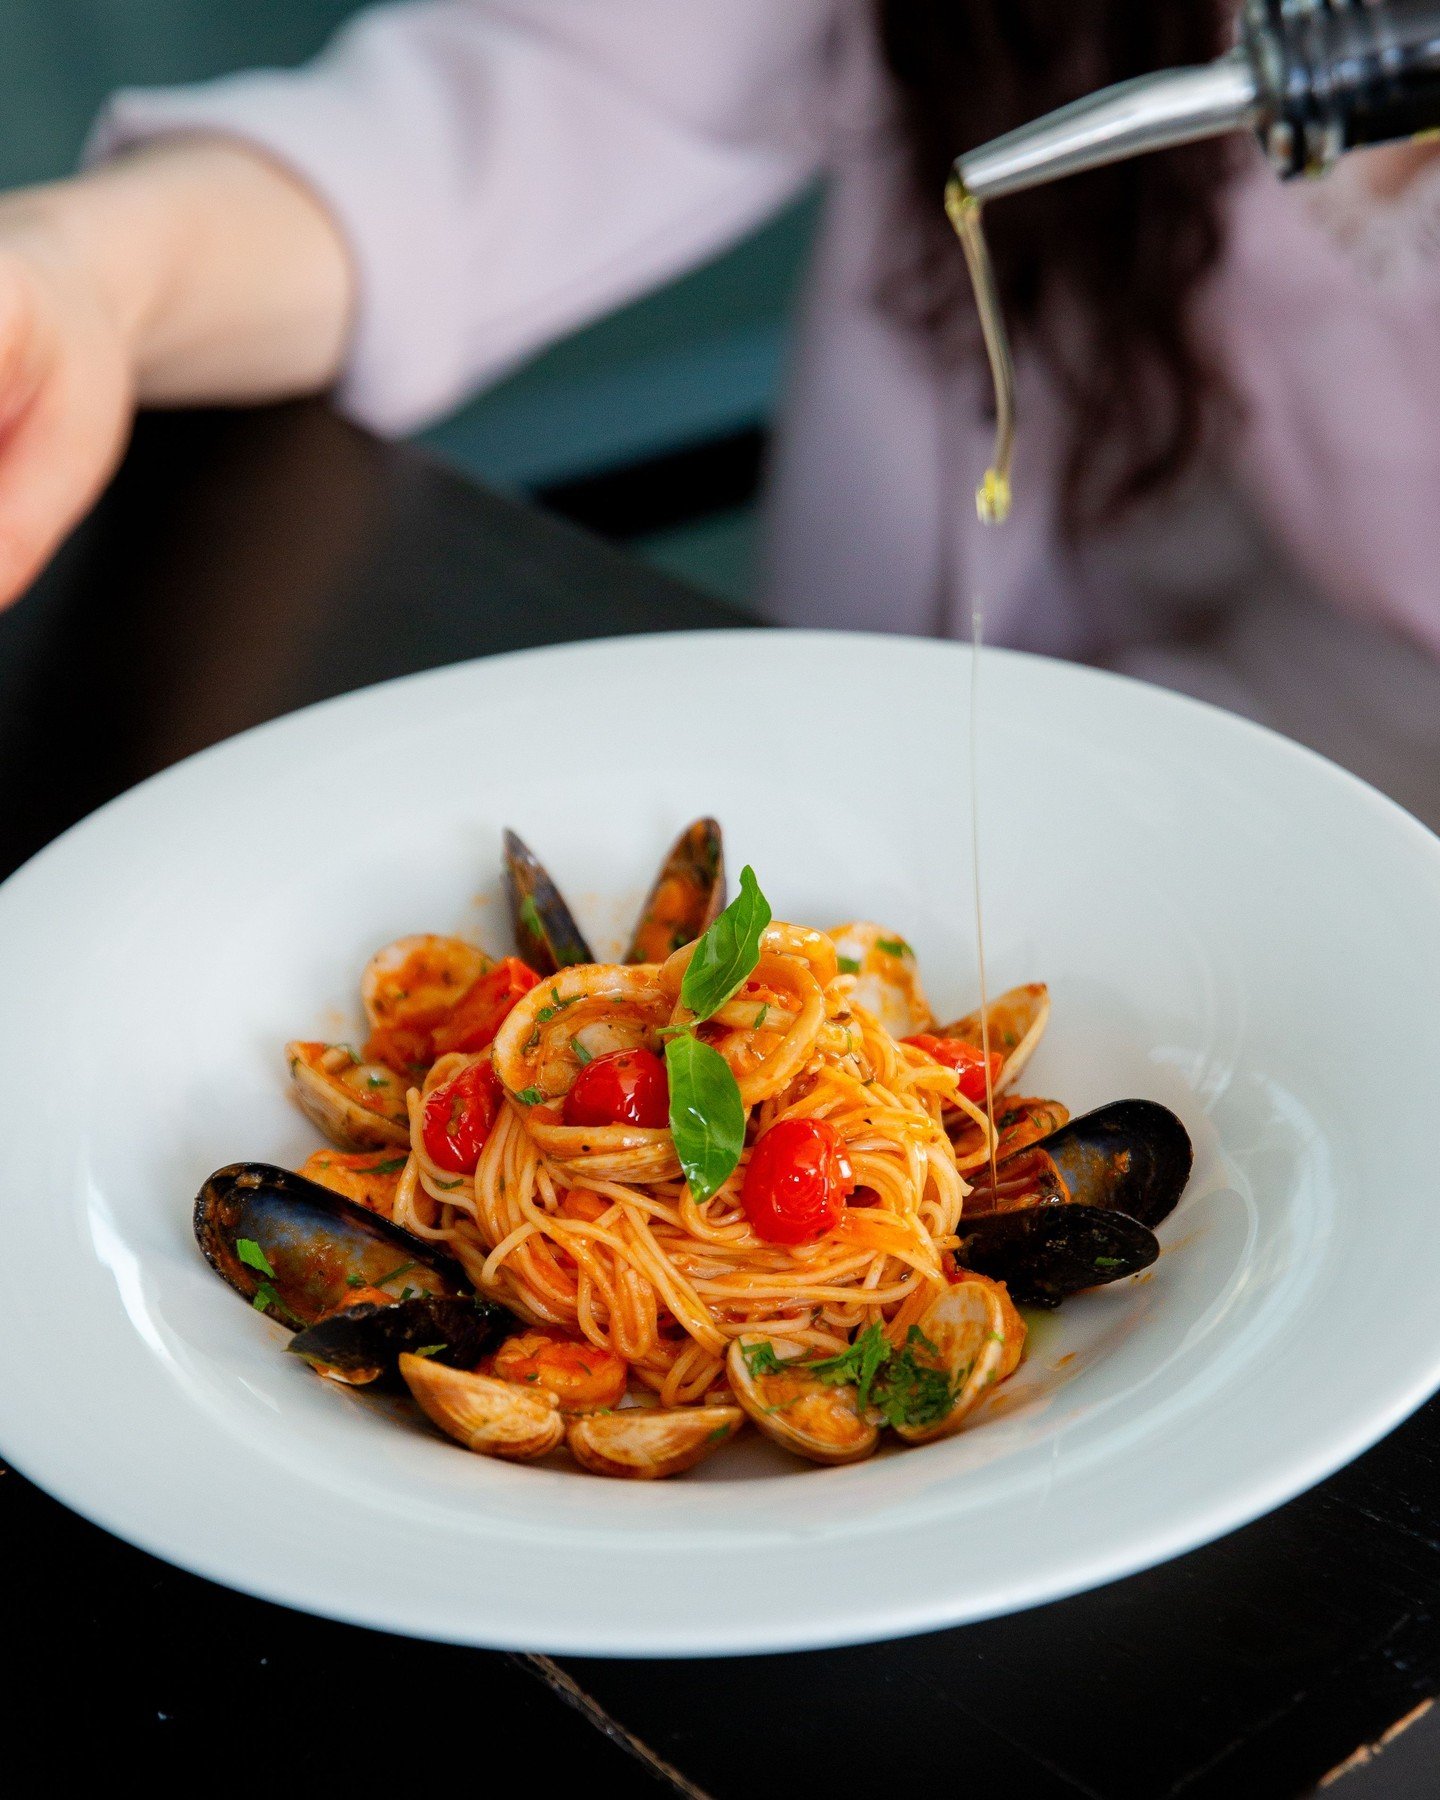 Our Tagliolini Al Frutti Di Mare is loaded with divine flavors.

To reserve, tap the link in our bio

#Oliveto #EnhanceYourSenses #Italian #Restaurant #Bahrain #KSA #Khobar #Dammam #Kuwait #Lounge #Livemusic #Foodie